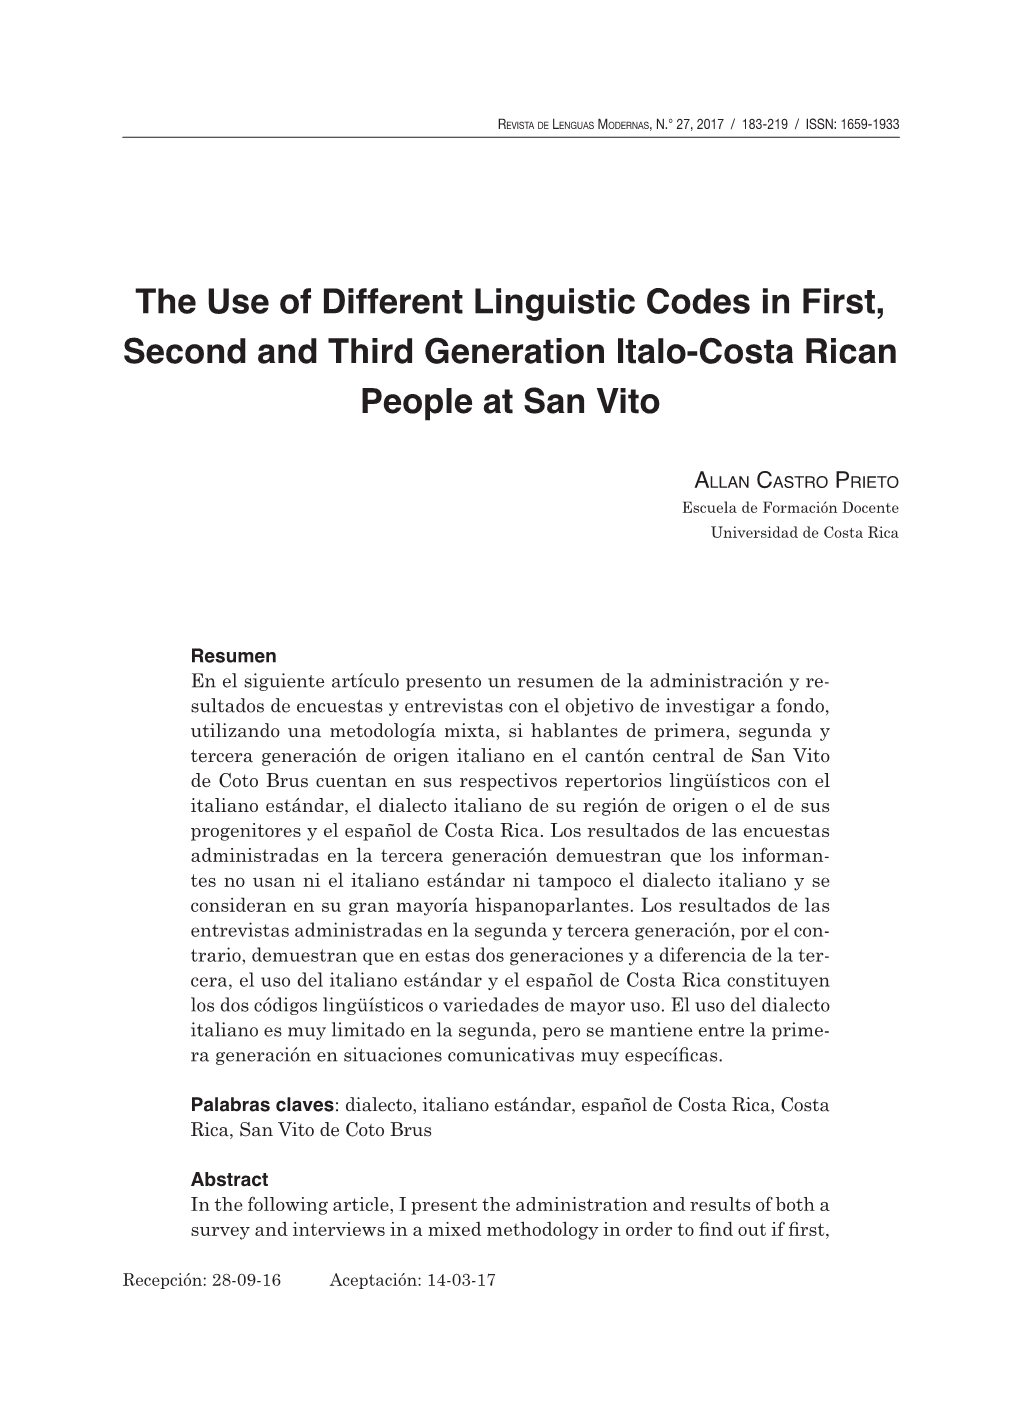 The Use of Different Linguistic Codes in First, Second and Third Generation Italo-Costa Rican People at San Vito